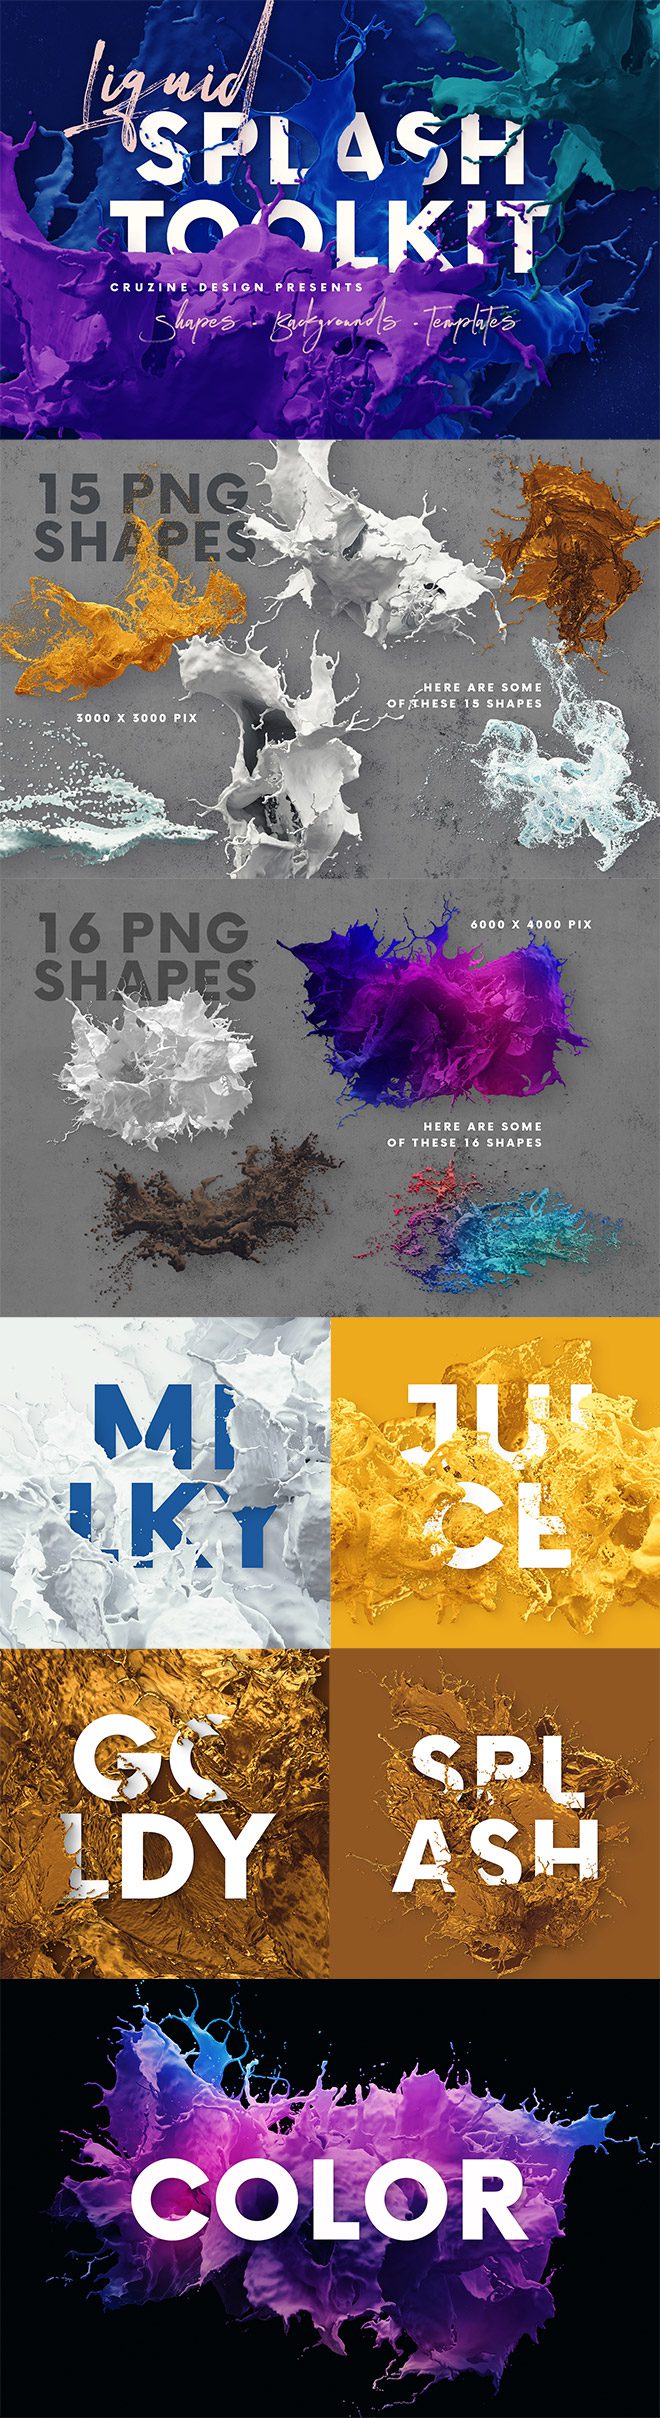 Liquid Splash PNGs, Backgrounds and Templates Toolkit